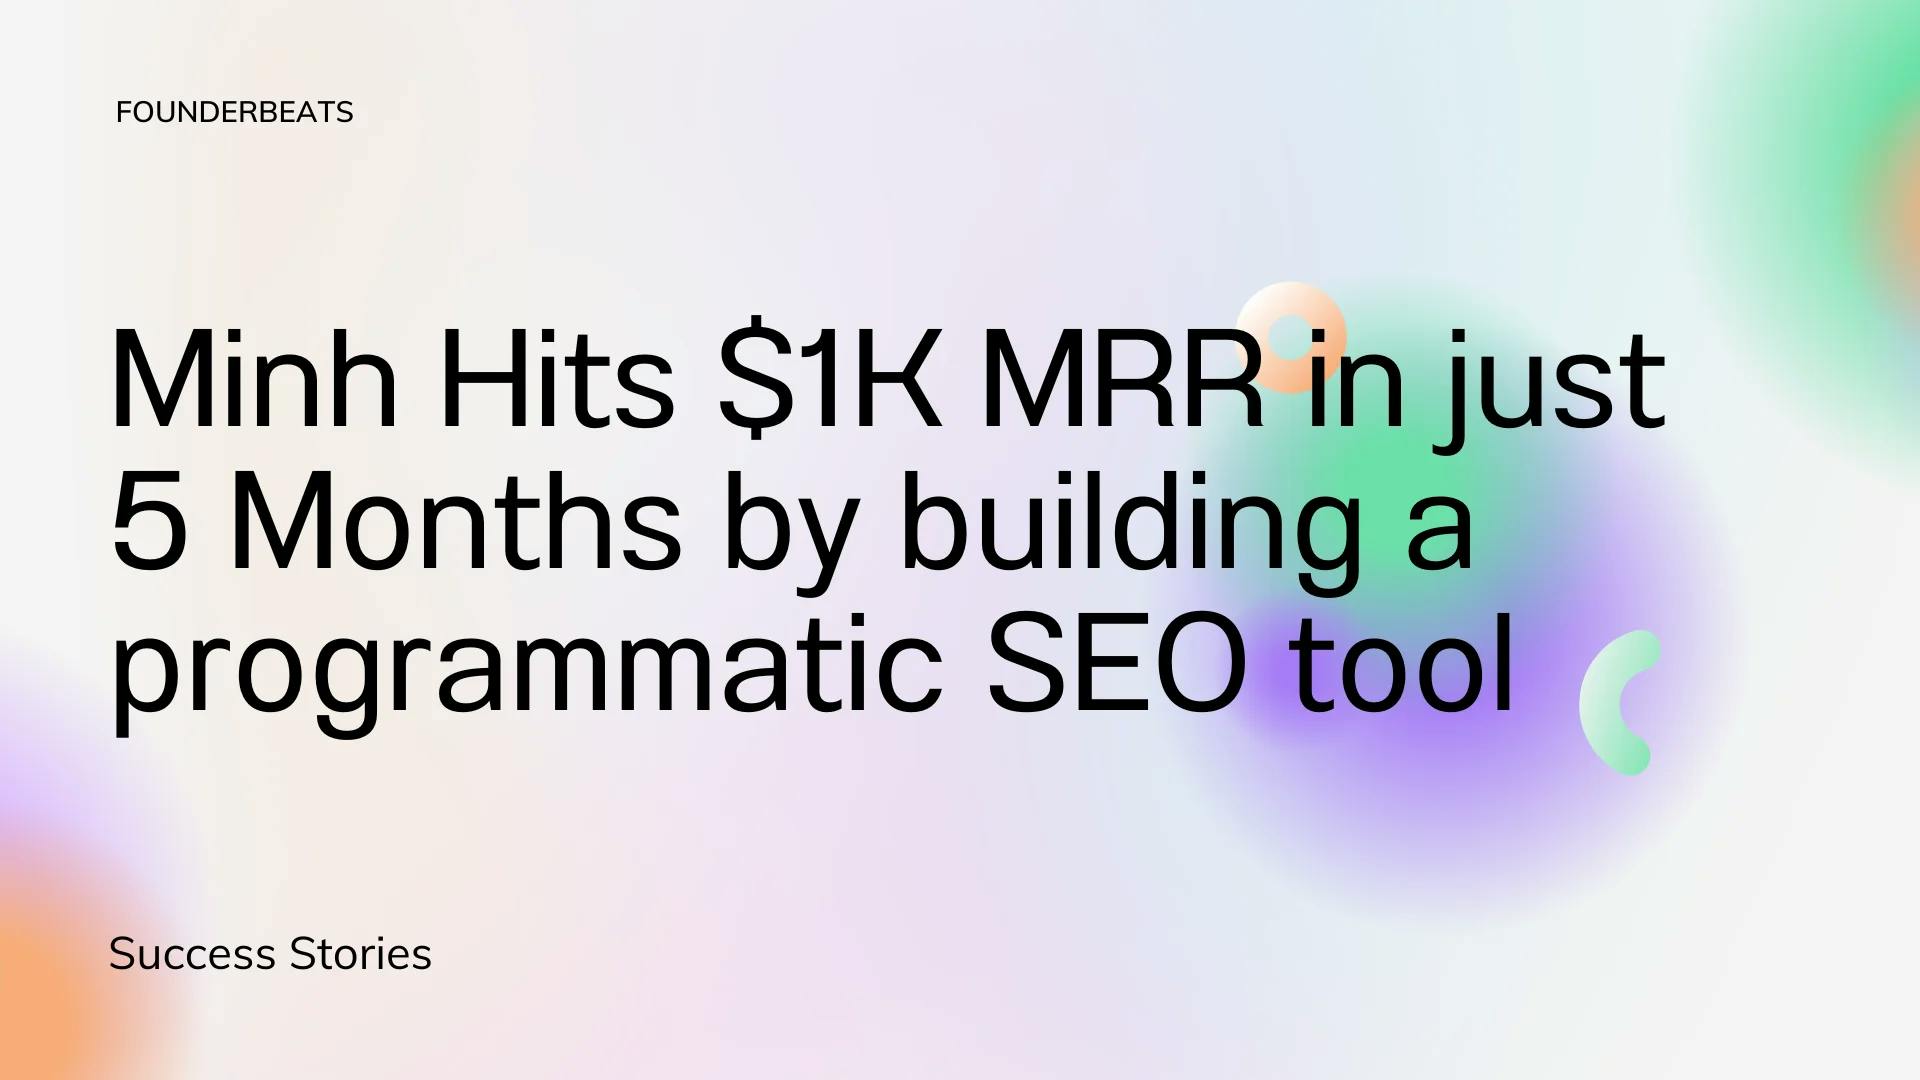 Minh Hits $1K MRR in just 5 Months by building a programmatic seo tool using no-code